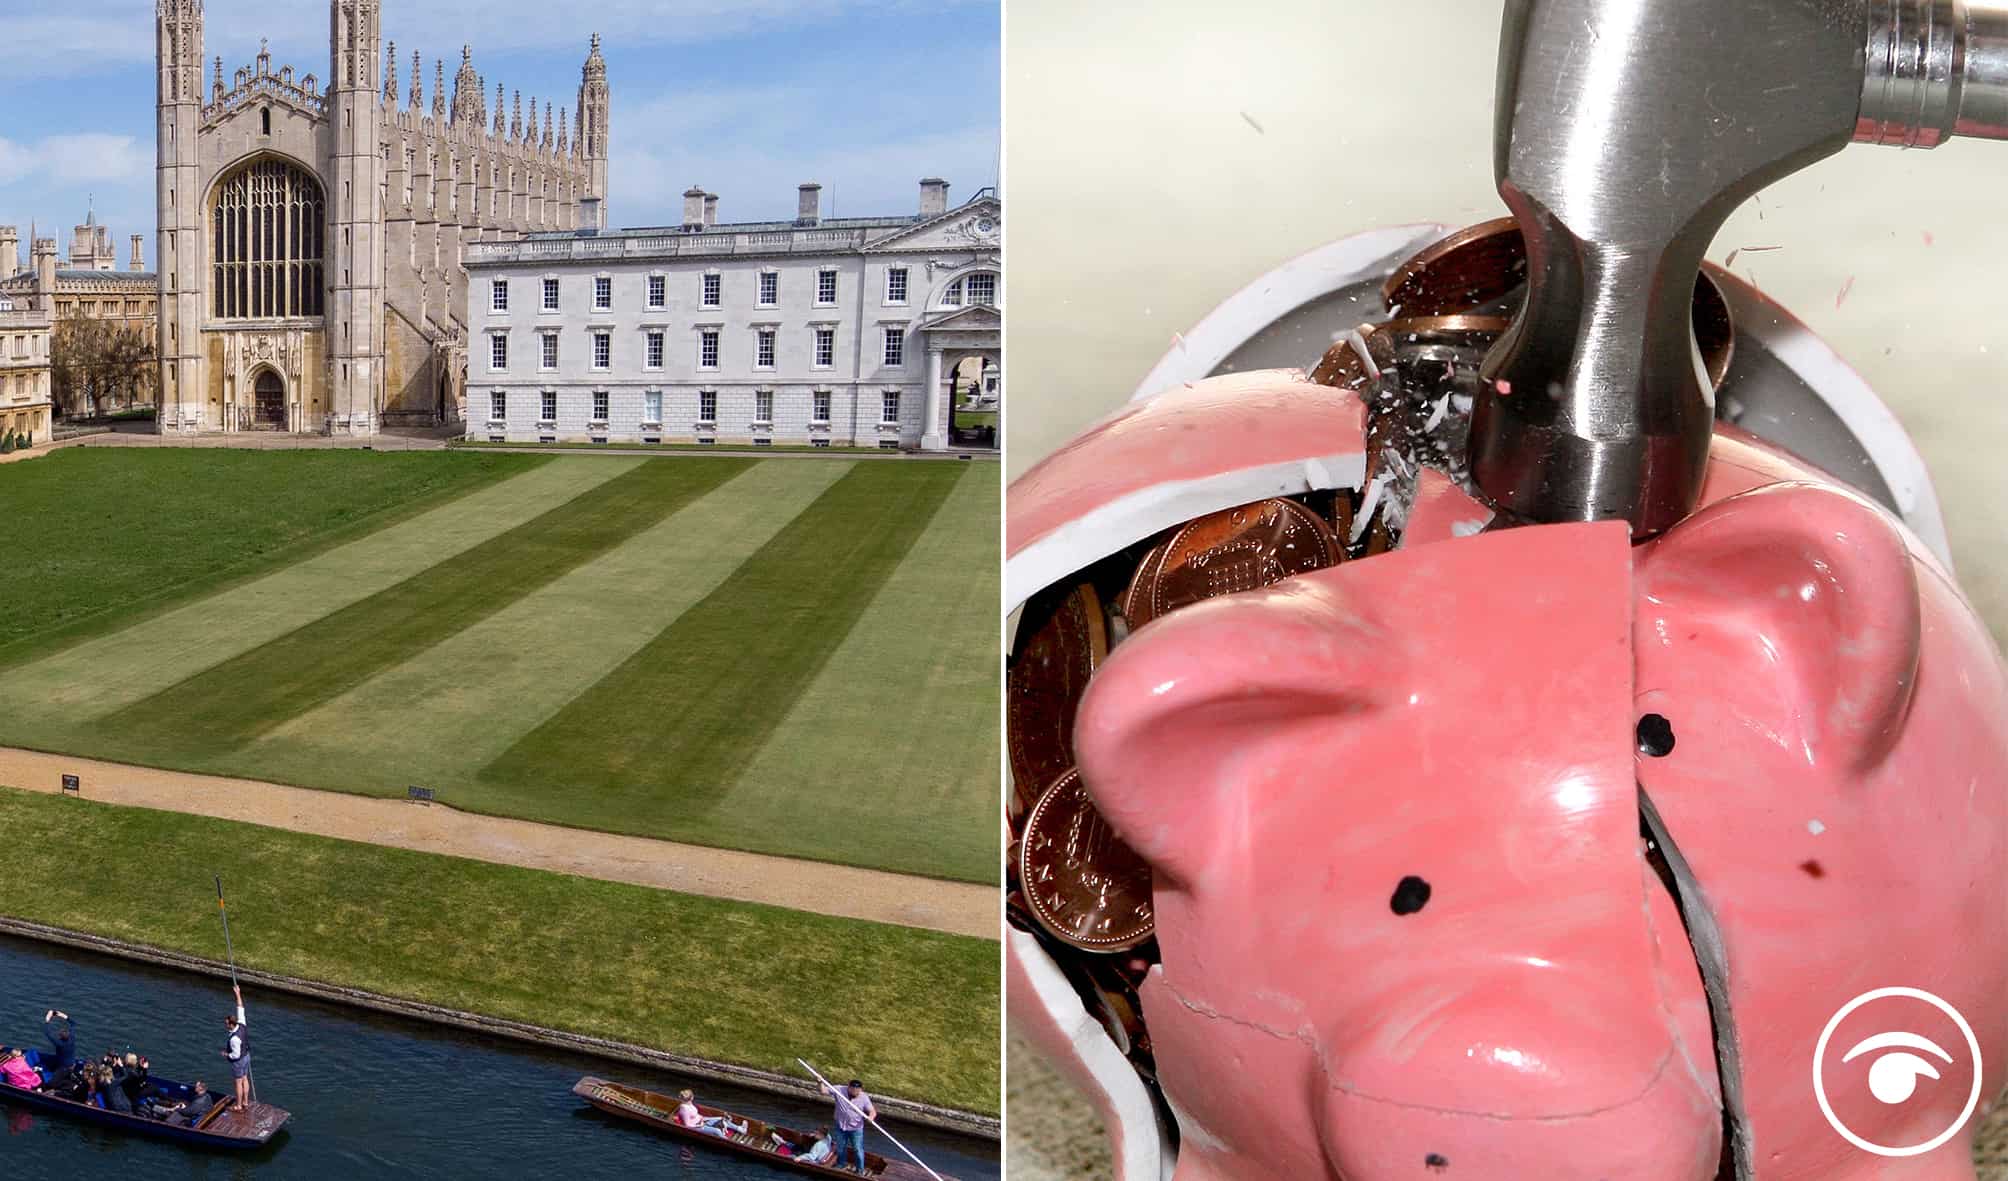 ‘Profound concern’ as Cambridge University accused of Faustian pact over deal with UAE